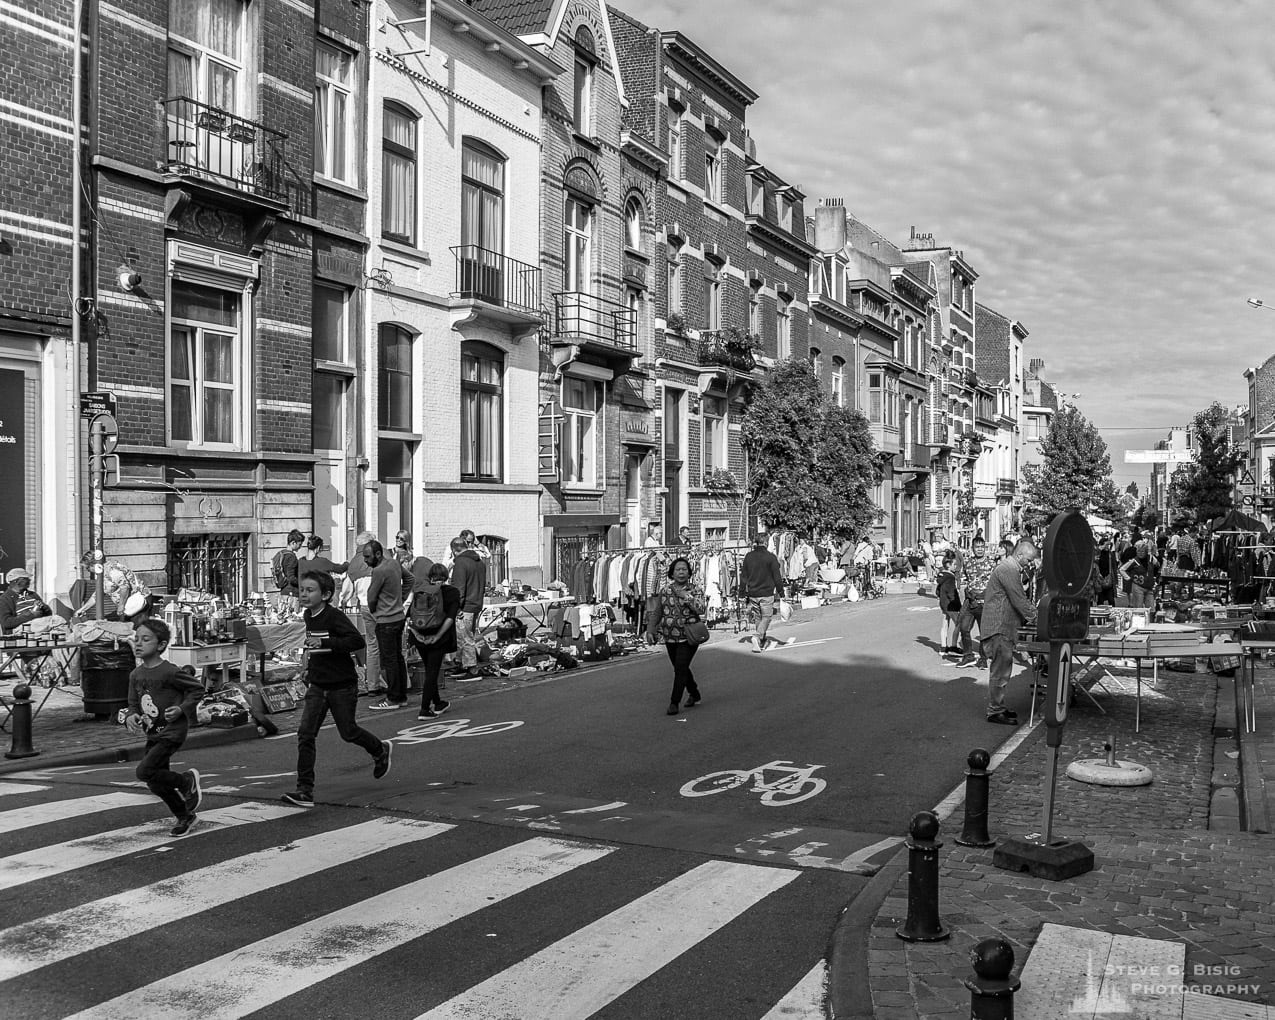 One of a series of black and white photographs from the 2018 Grande Braderie D'Ixelles sidewalk sale and street festival in Brussels, Belgium.